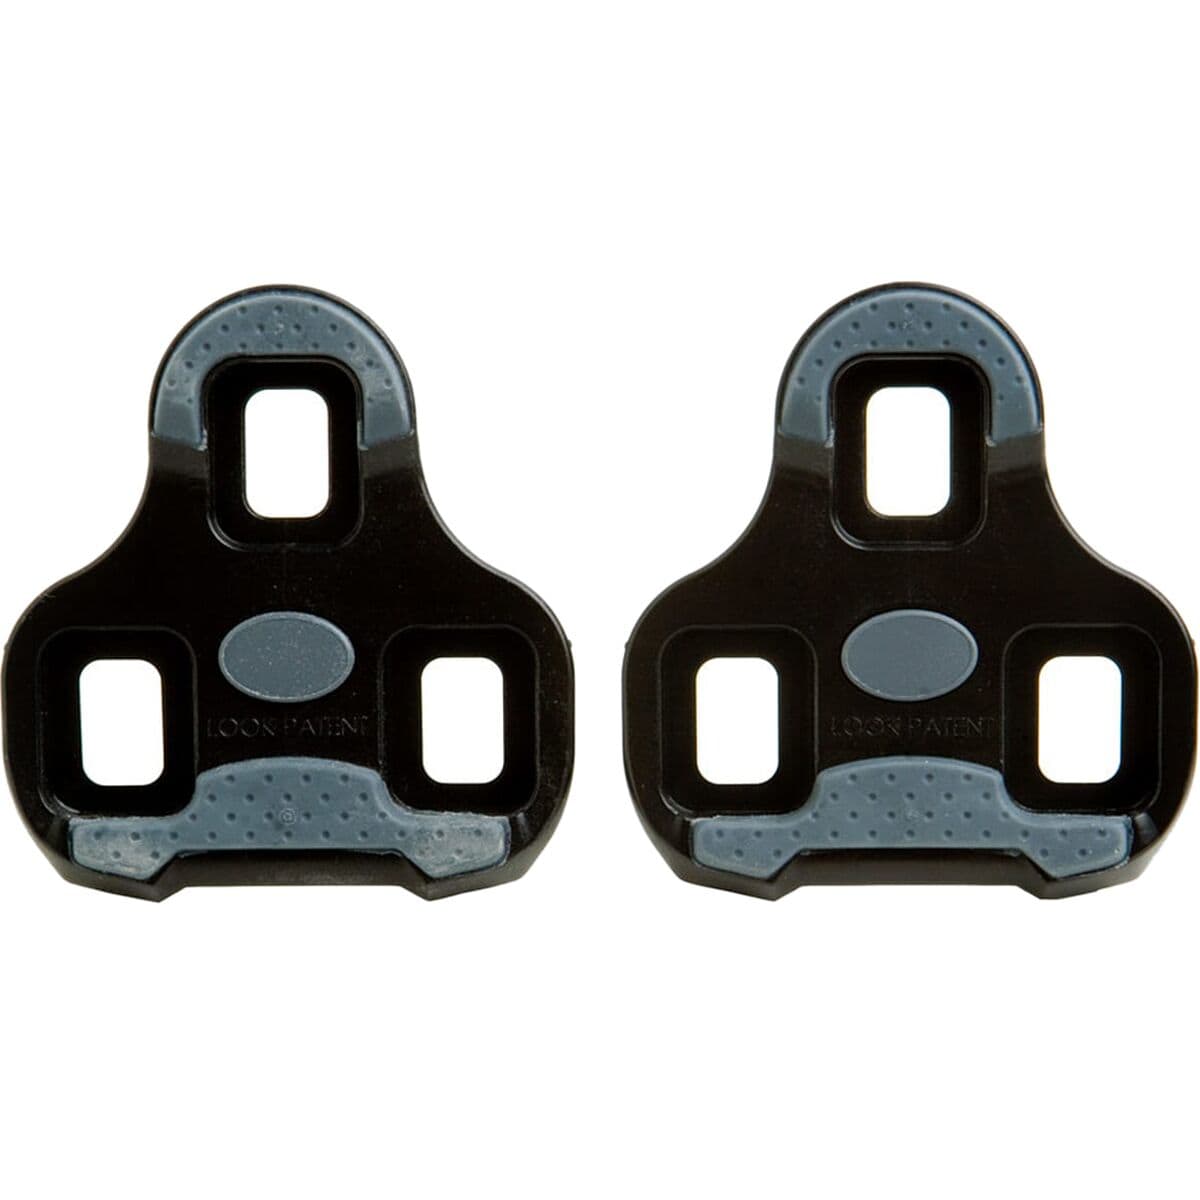 Look Cycle Keo Grip Cleat - Components